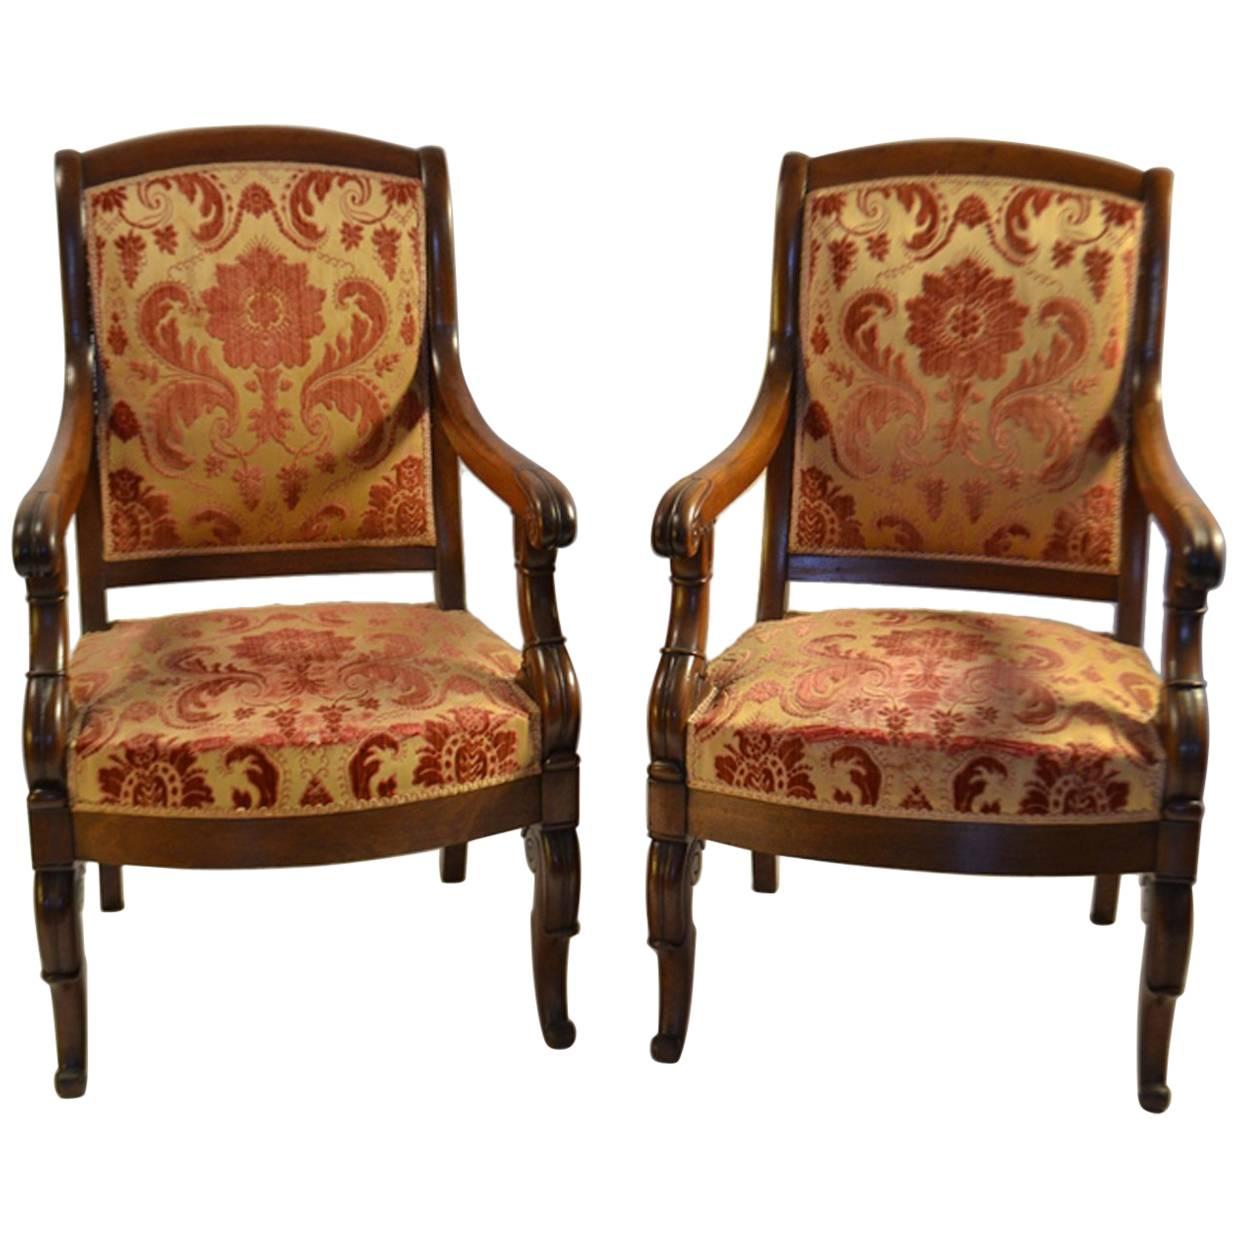 Pair of Louis-Phillippe Mahogany Fauteuils For Sale